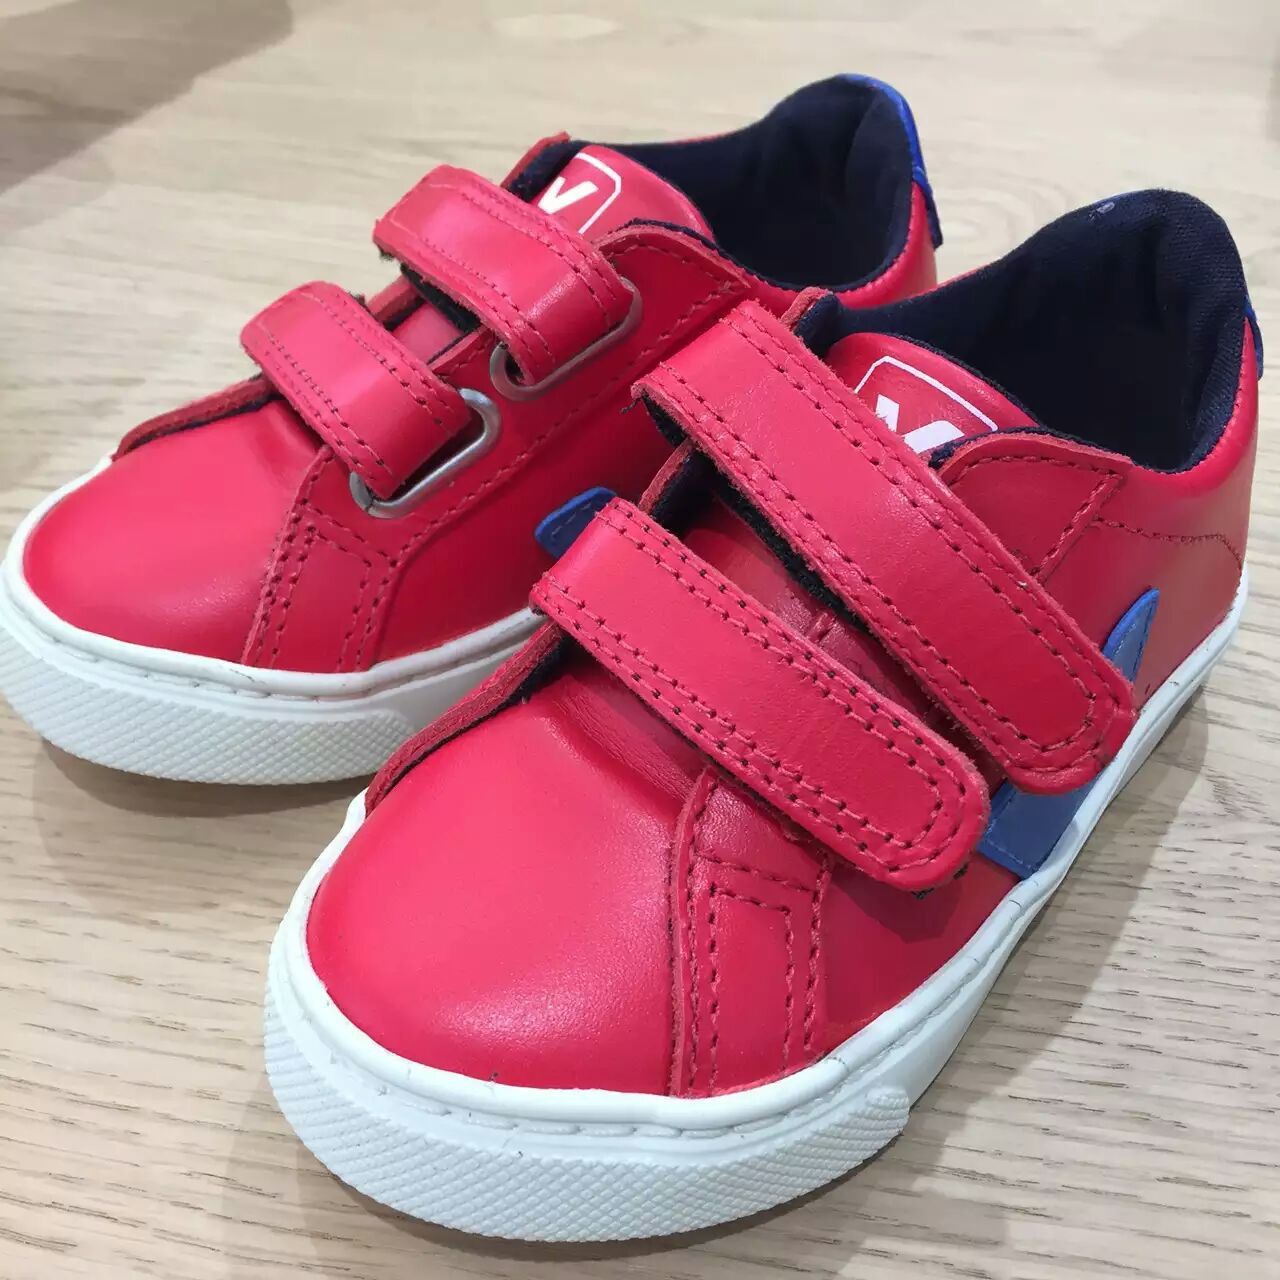 Boys&Girls Red Leather Velcro Shoes - CÉMAROSE | Children's Fashion Store